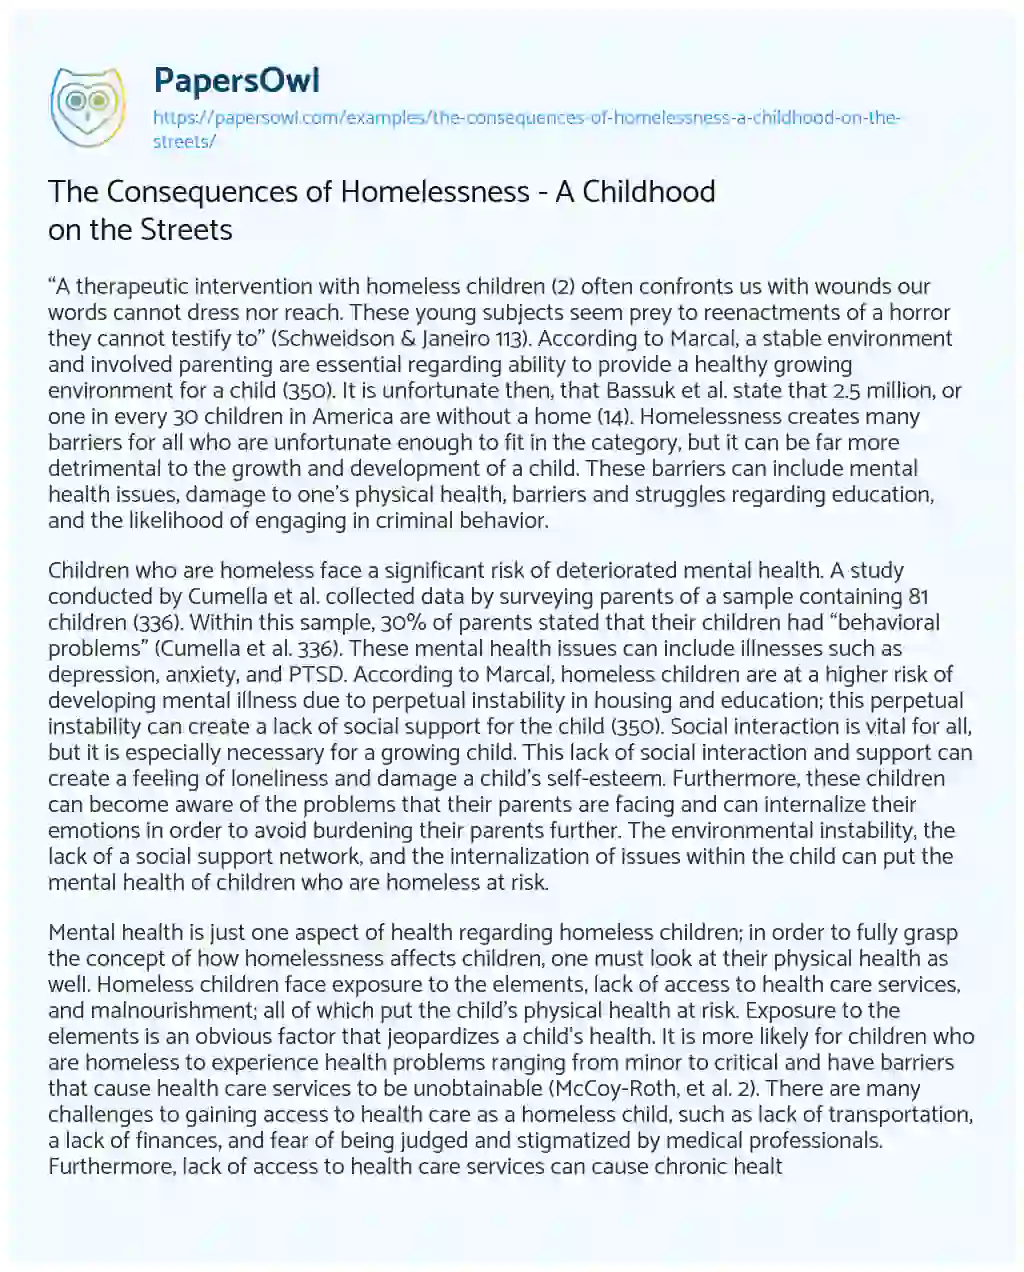 Essay on The Consequences of Homelessness – a Childhood on the Streets